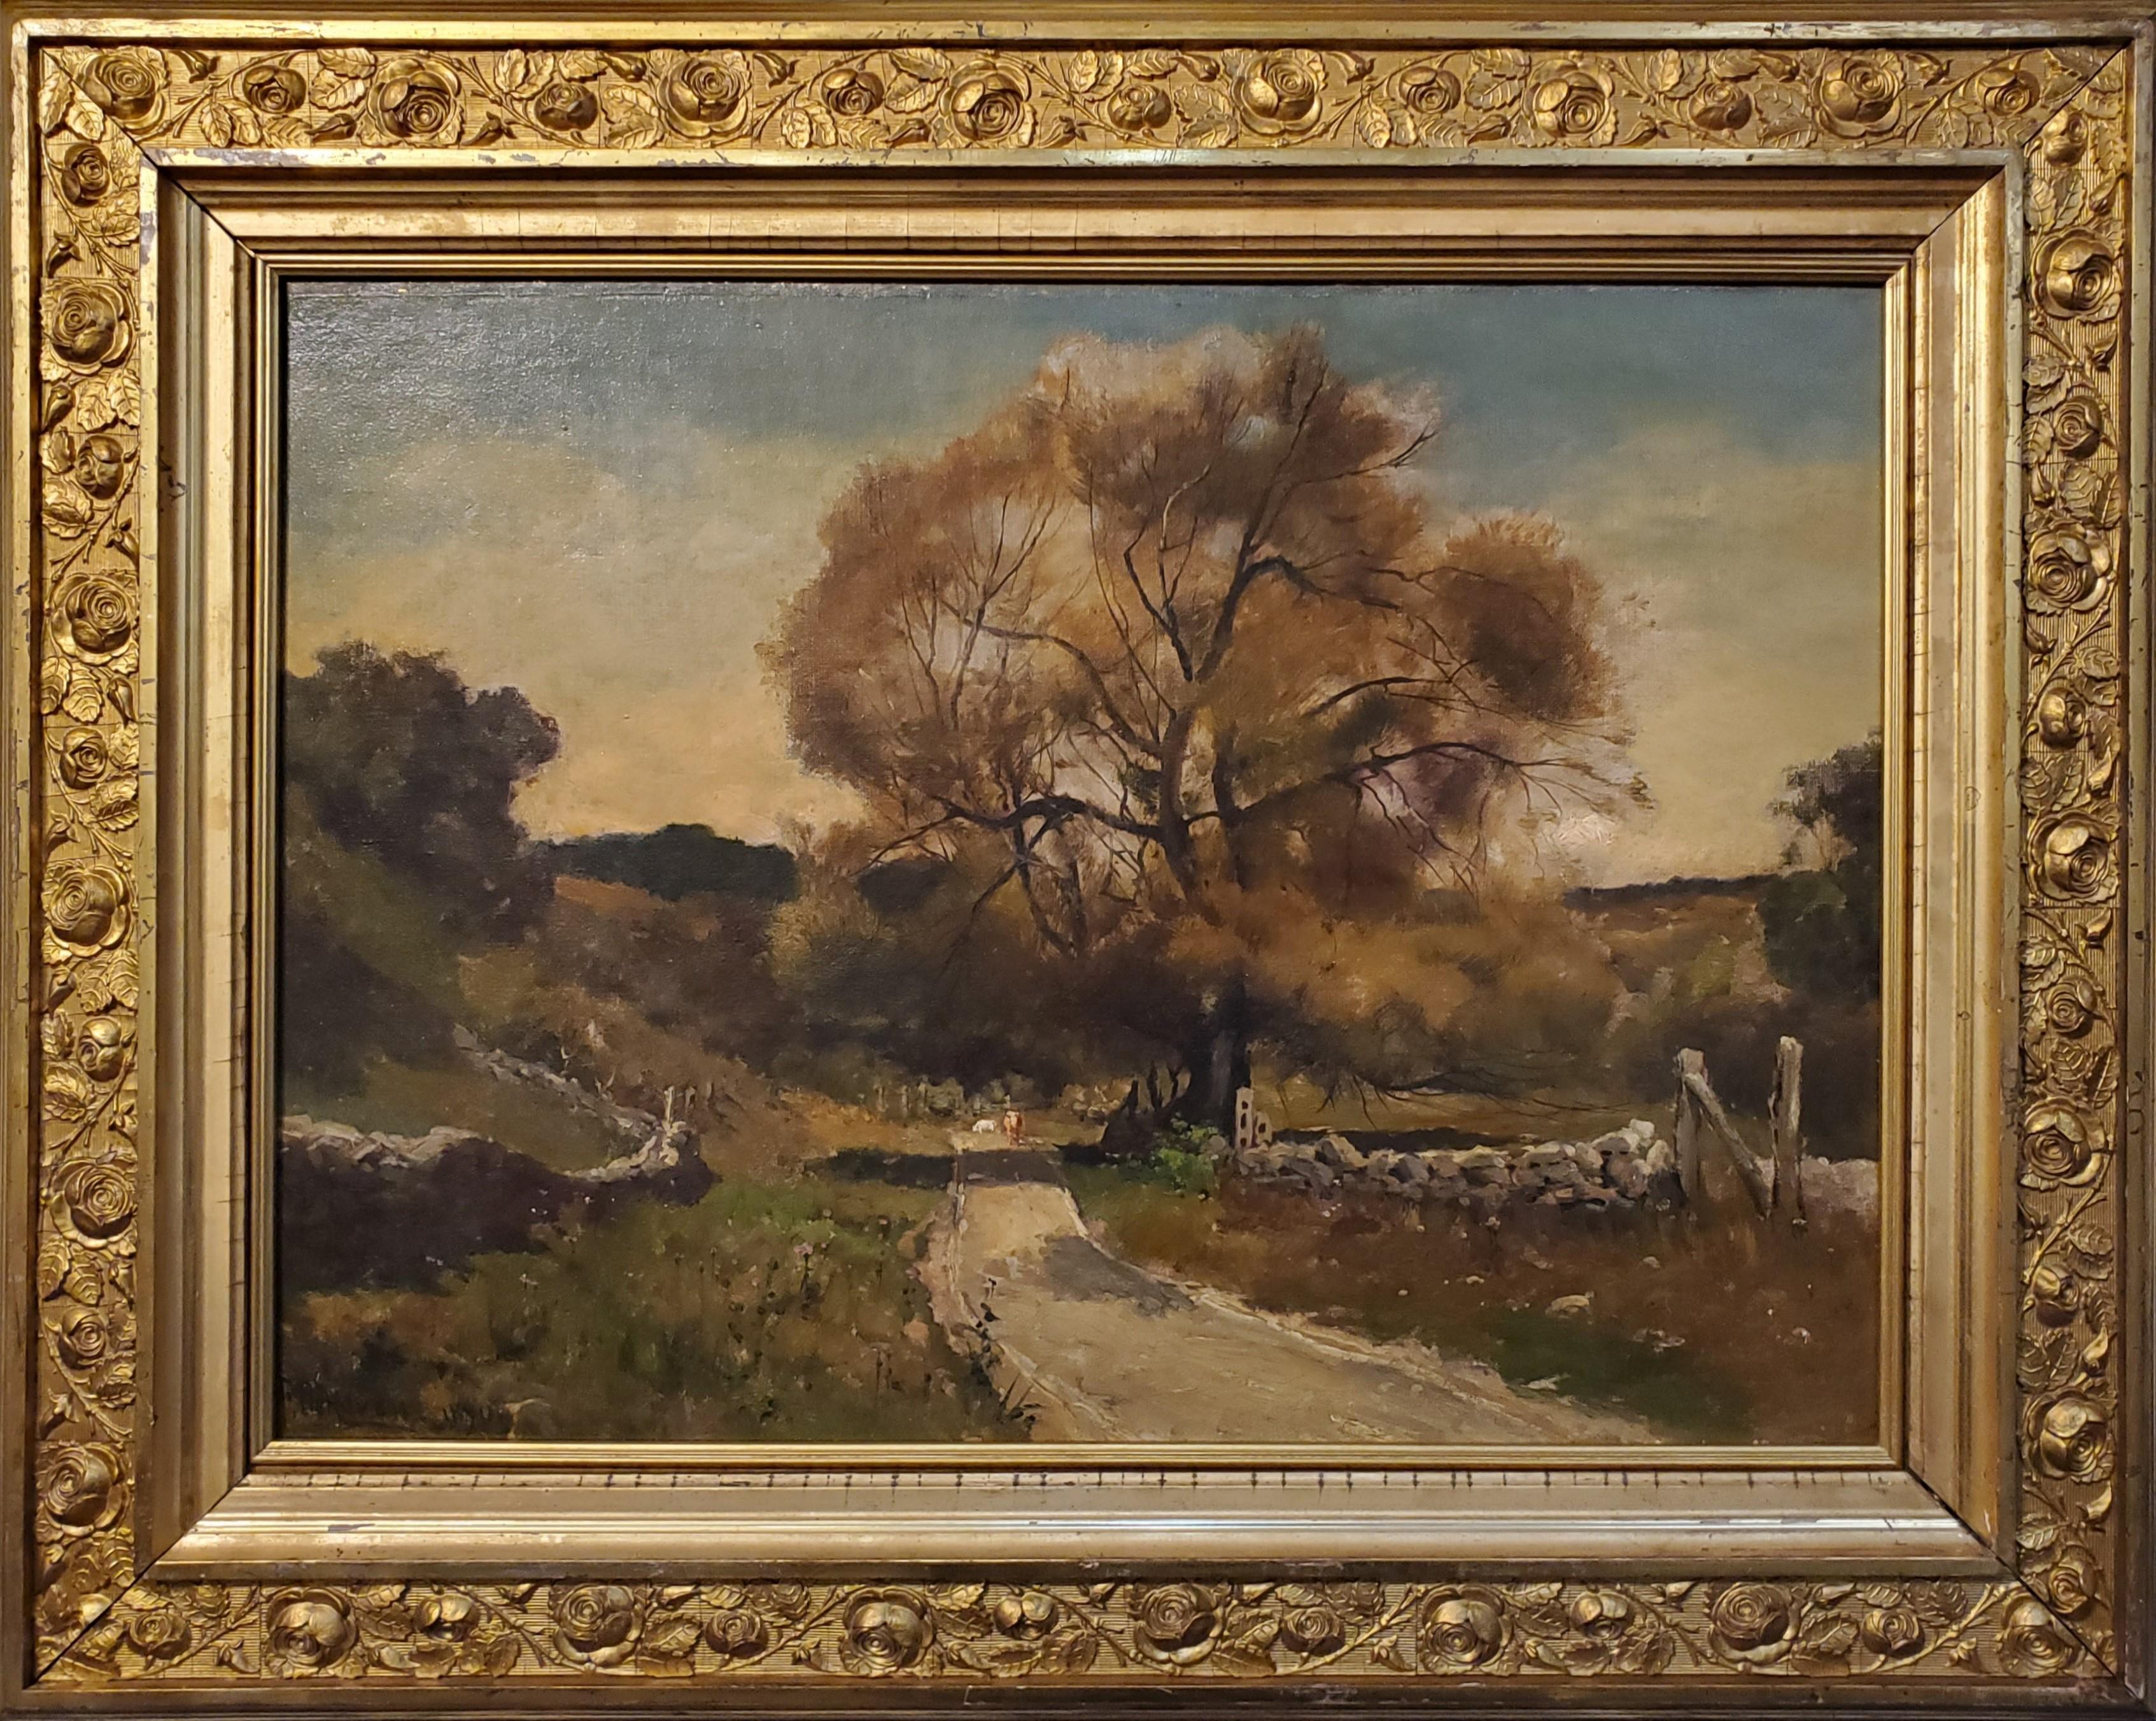 Benjamin Franklin De Haven Landscape Painting - An American Autumn Landscape Oil Painting Signed and Dated by Benjamin De Haven